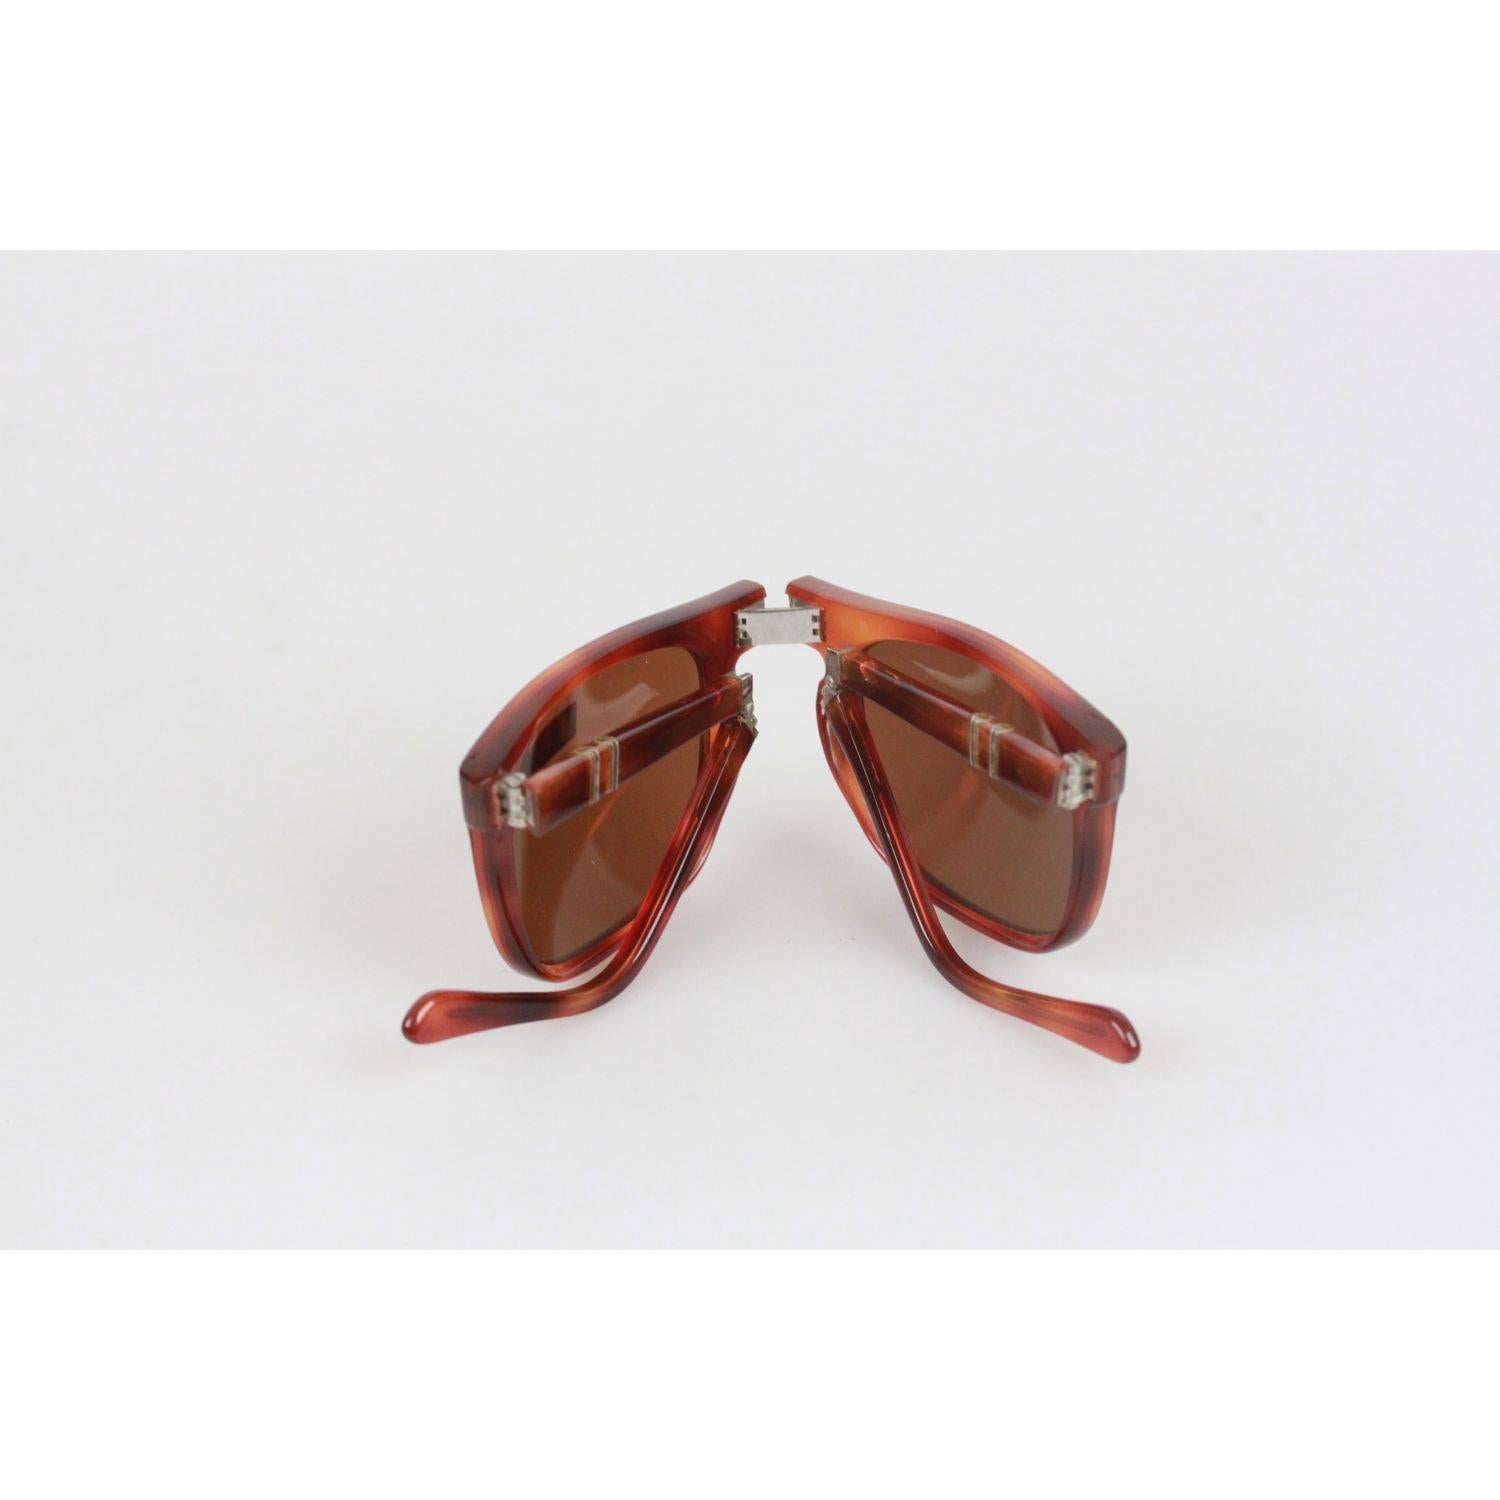 Legendary Original Vintage Persol Meflecto Ratti 807 folding Sunglasses
Brown Acetate frame, with original Persol brown glass lens
Meflecto System. Rare Piece
New Old Stock - Never Worn or Used - they will come with a GENERIC RIGID